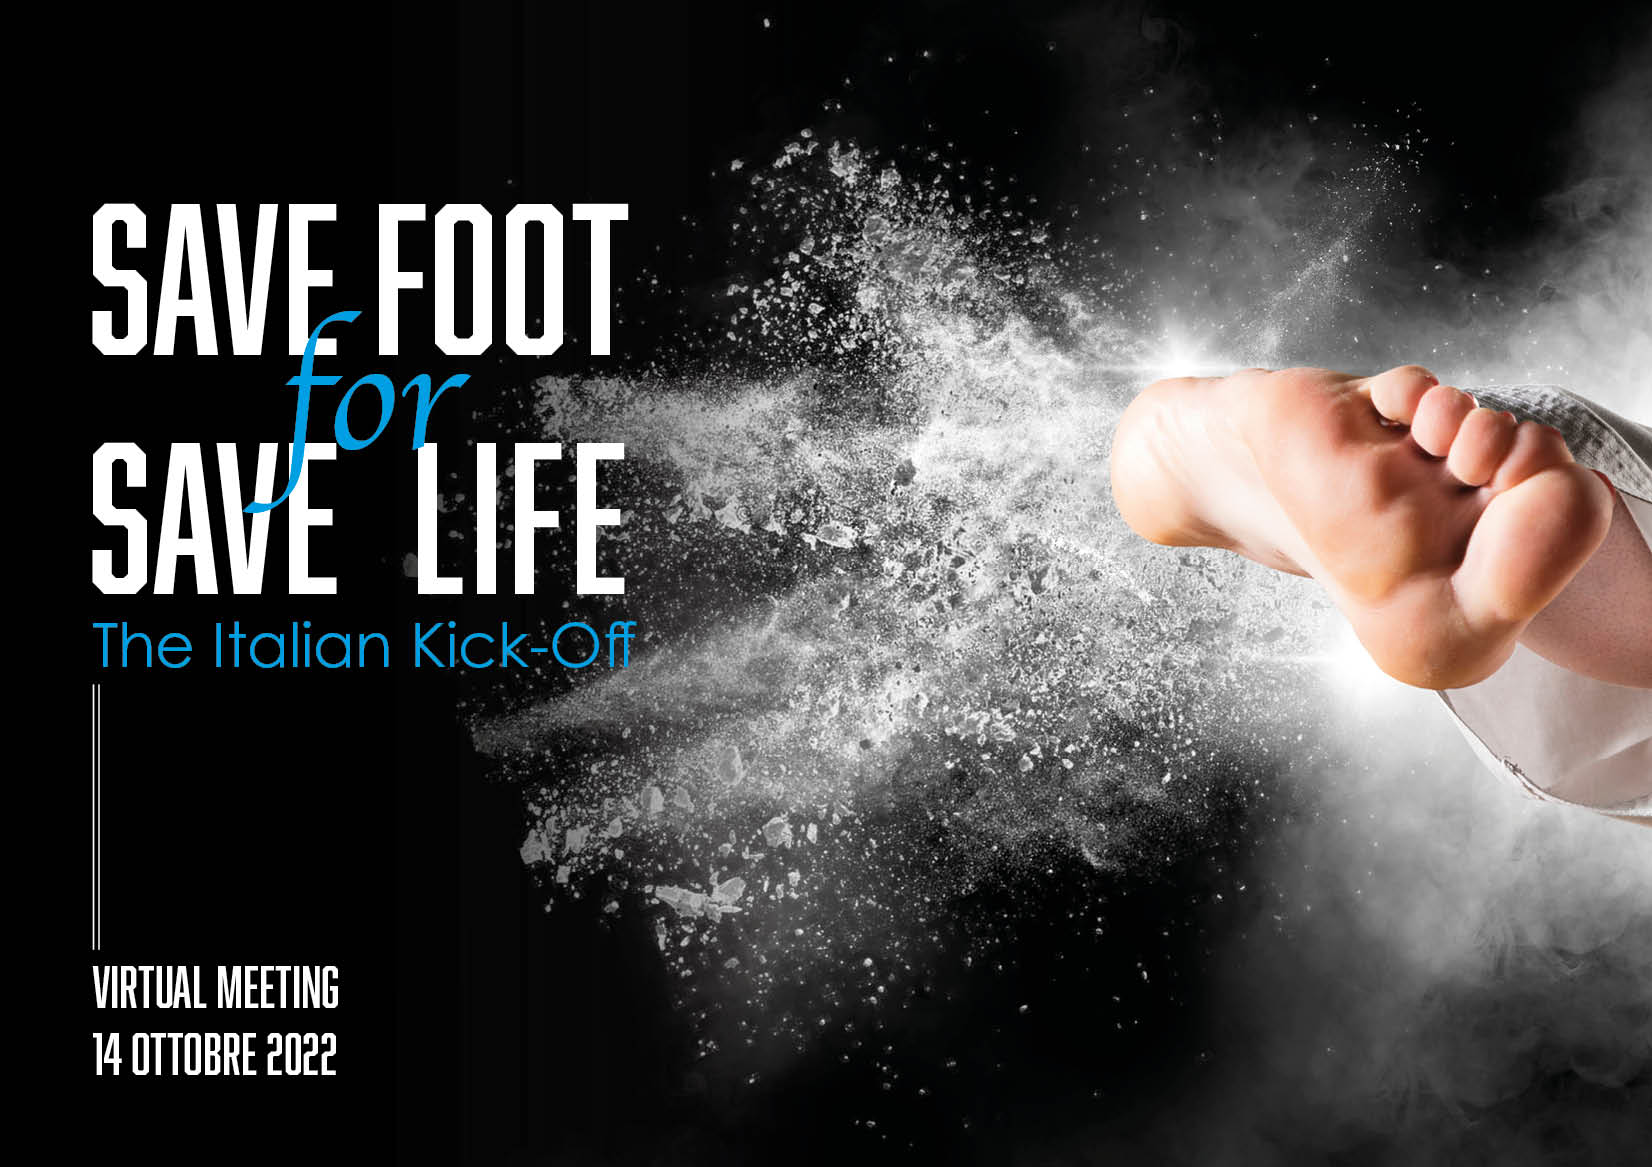 SAVE FOOT FOR SAVE LIFE – The Italian Kick-Off